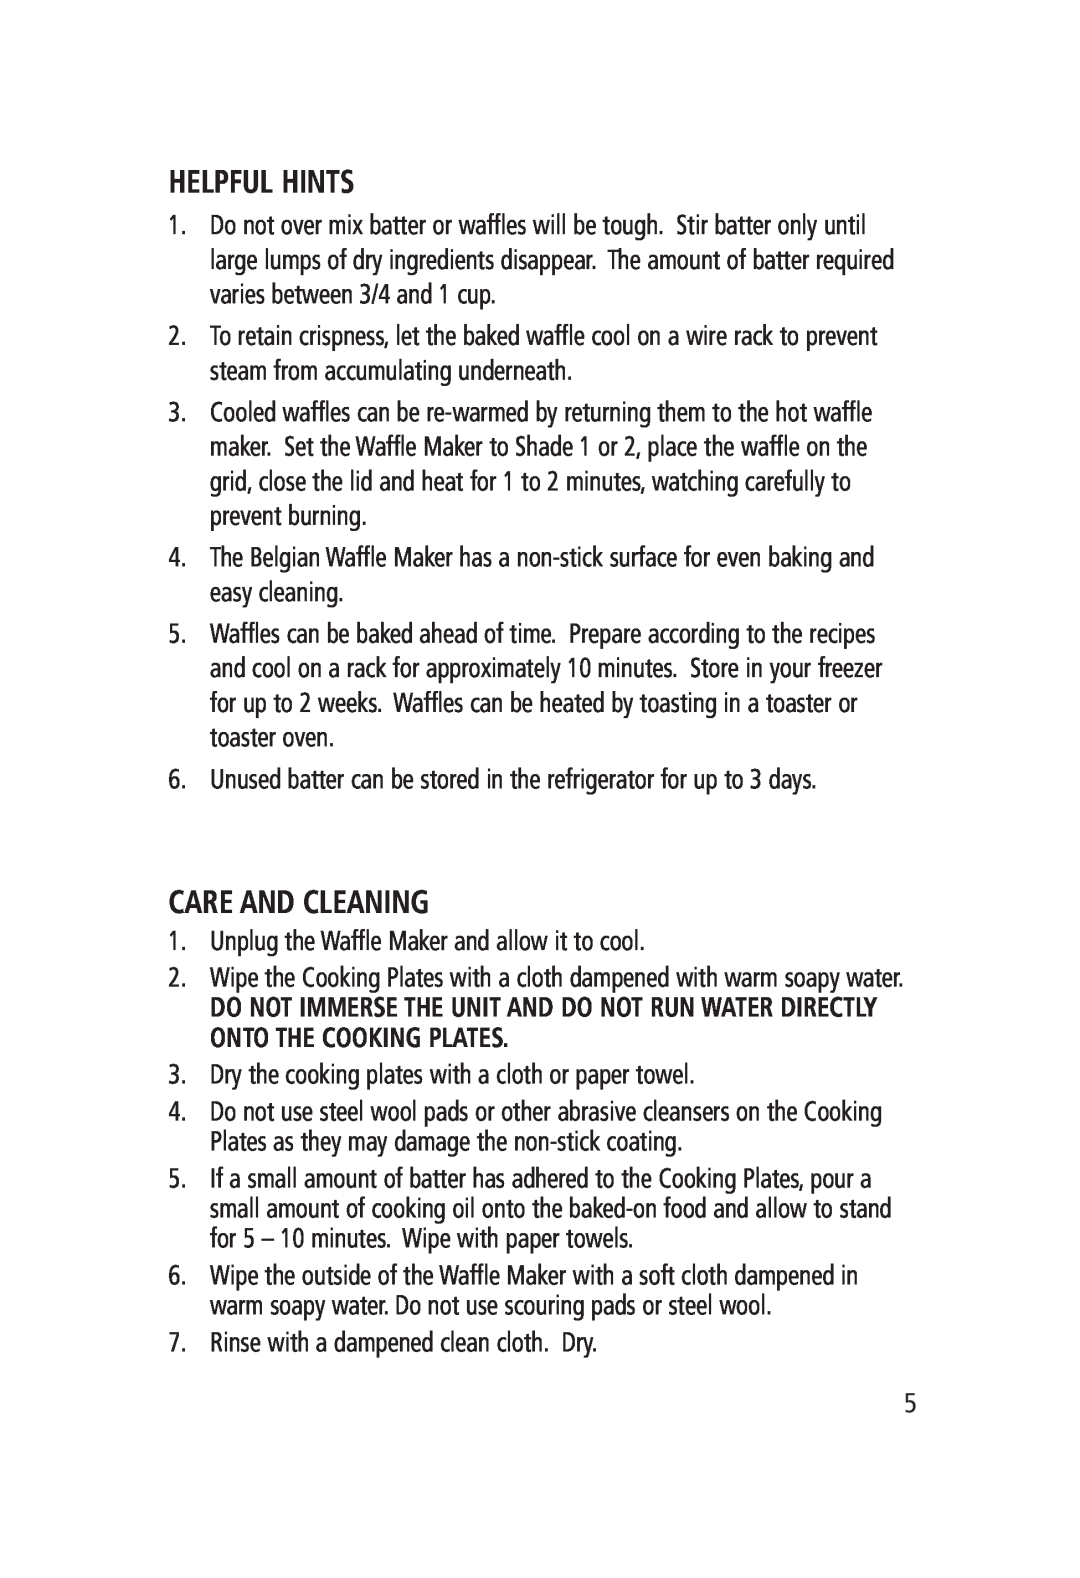 Salton WM-1186 manual Helpful Hints, Care And Cleaning 